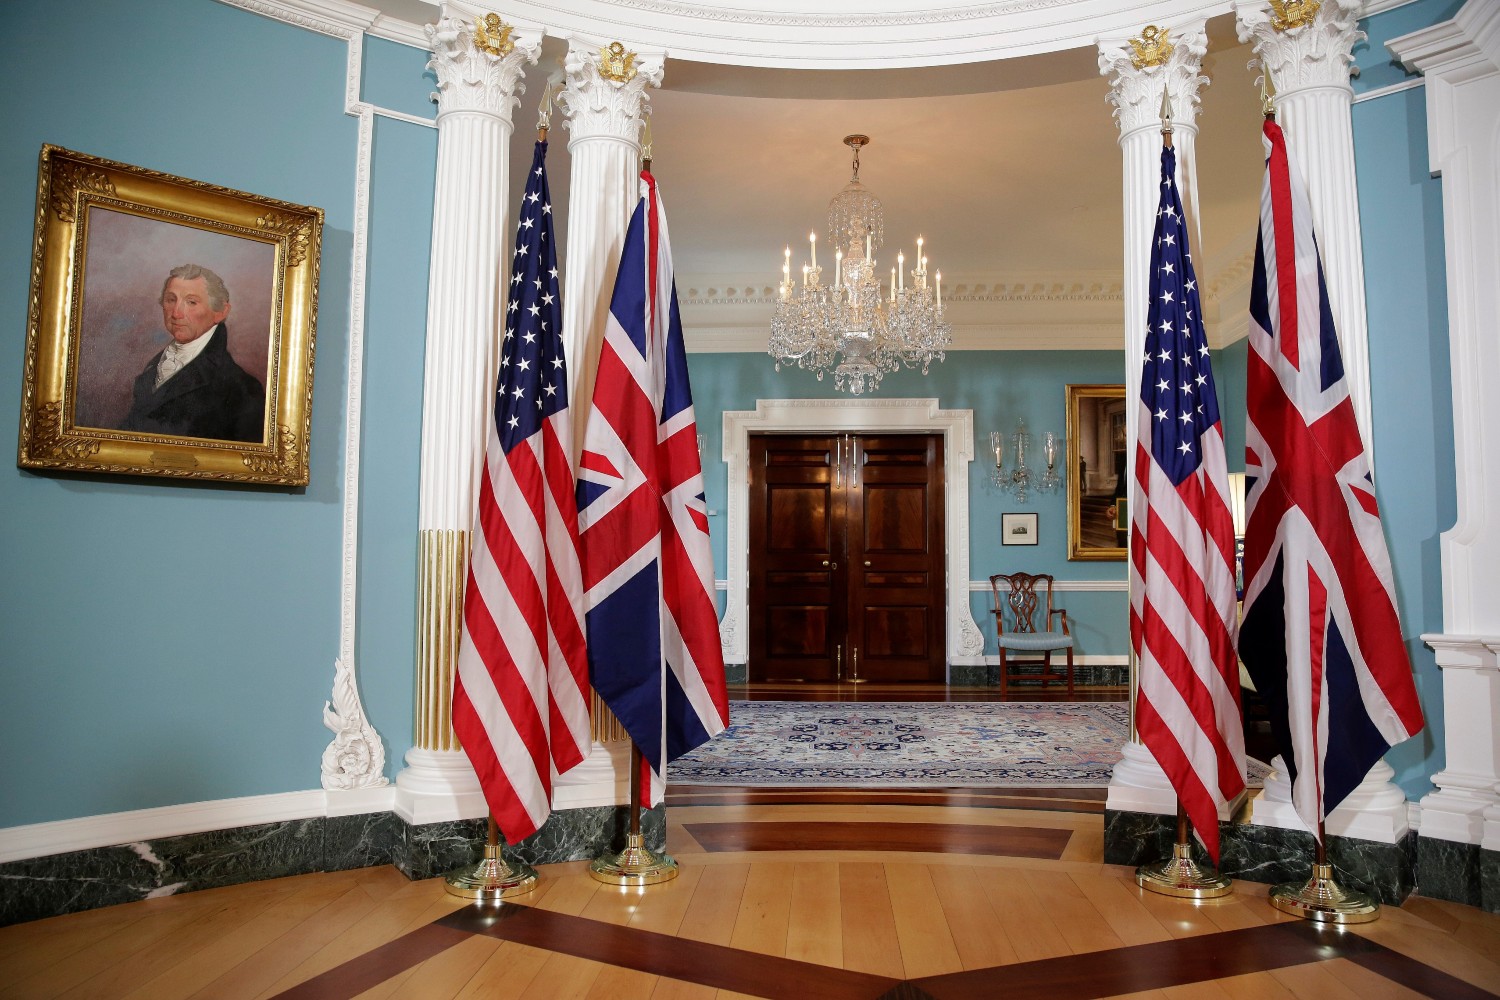 The flags of the United States and the United Kingdom stand after bi-lateral photo between U.S. Secretary of State Rex Tillerson and British Foreign Minister Boris Johnson was cancelled at the State Department in Washington, U.S. March 22, 2017. Reuters/Joshua Roberts